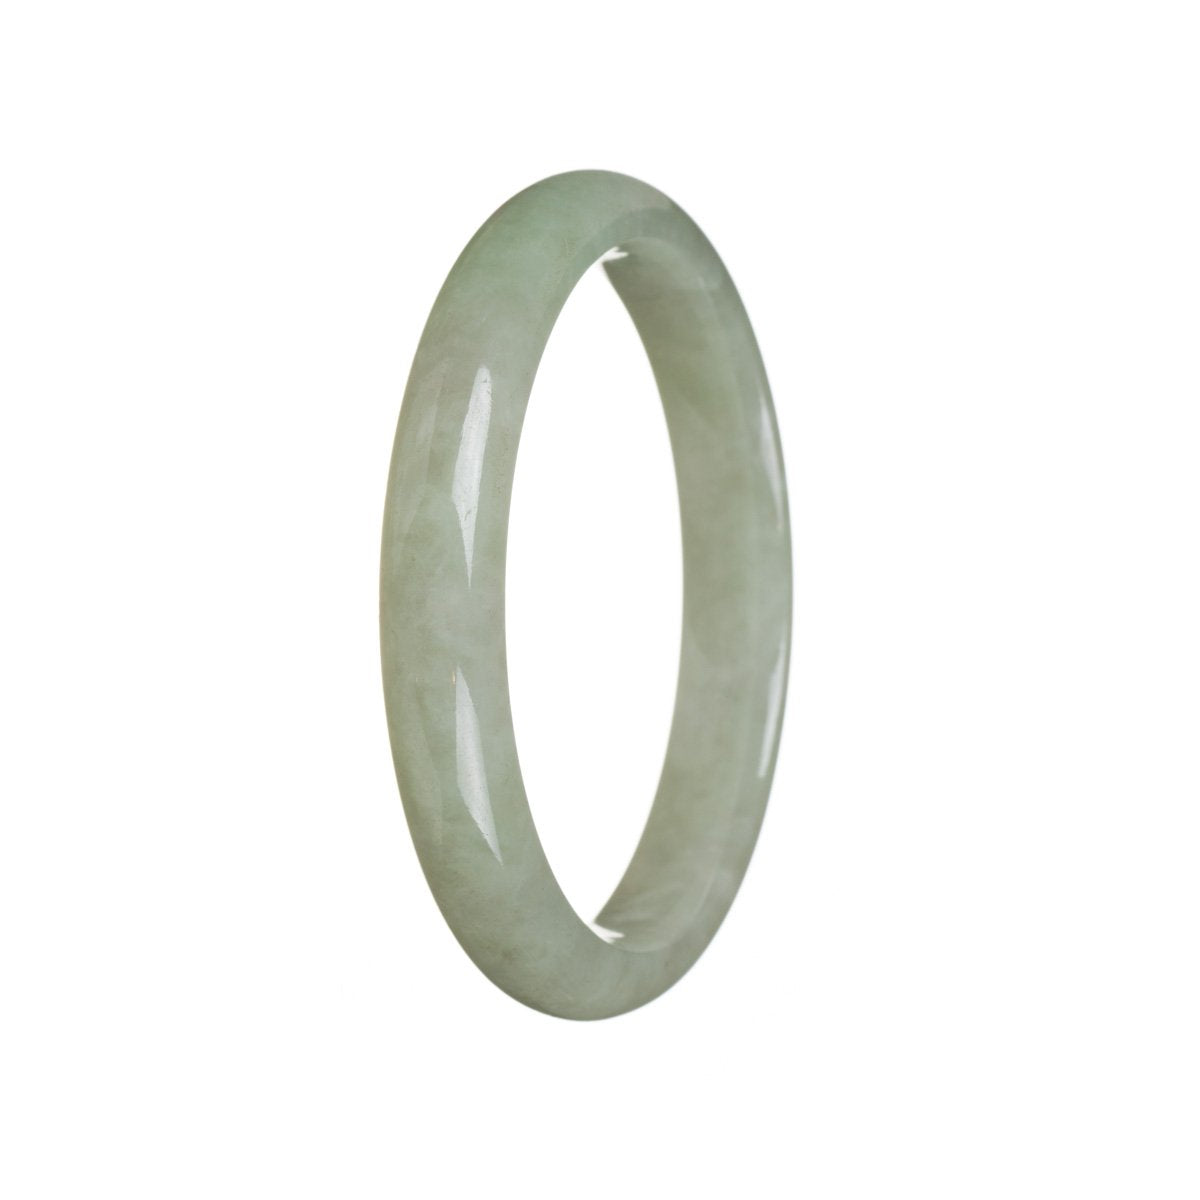 A beautiful semi-round green jade bangle, 57mm in size, with authentic Type A jade.